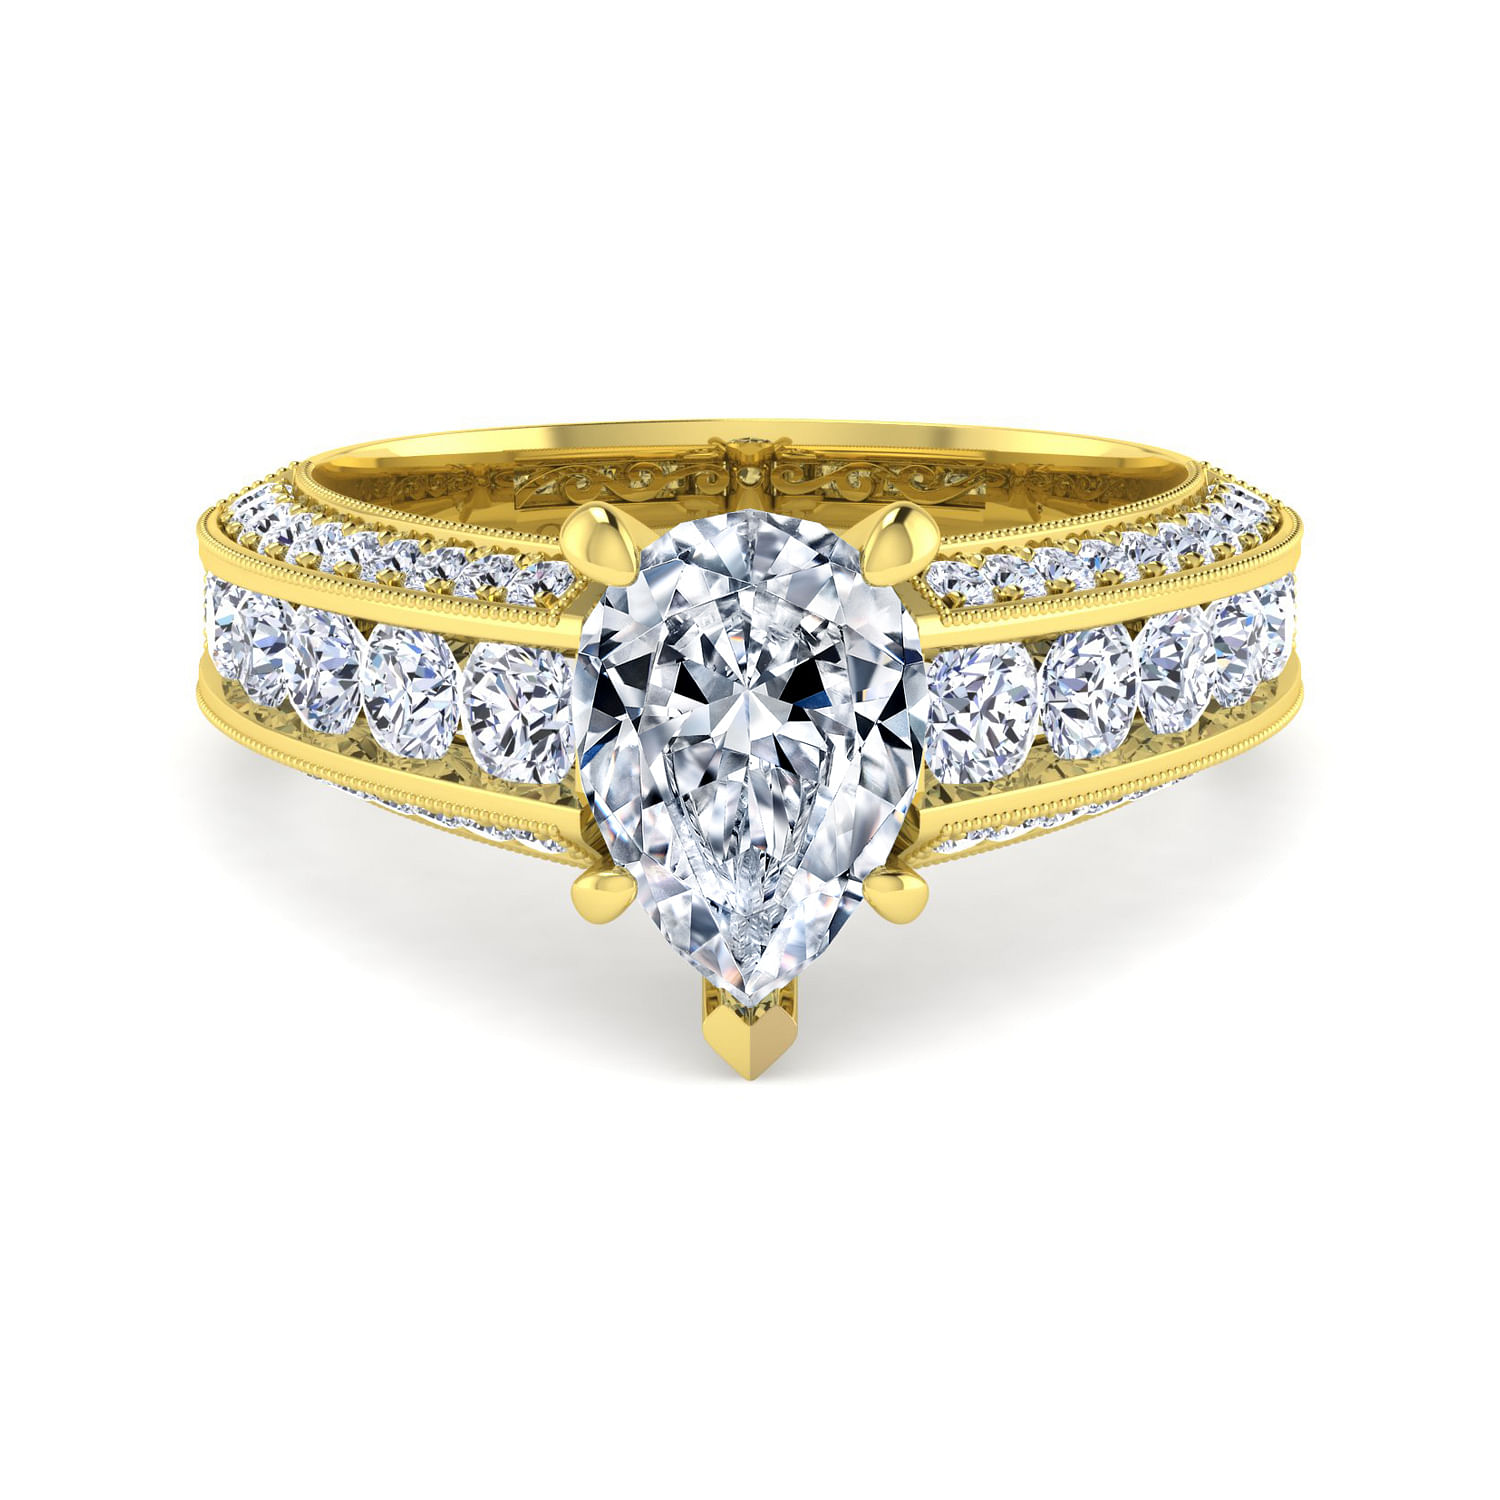 Rebecca - Vintage Inspired 14K Yellow Gold Wide Band Pear Shape Diamond Engagement Ring